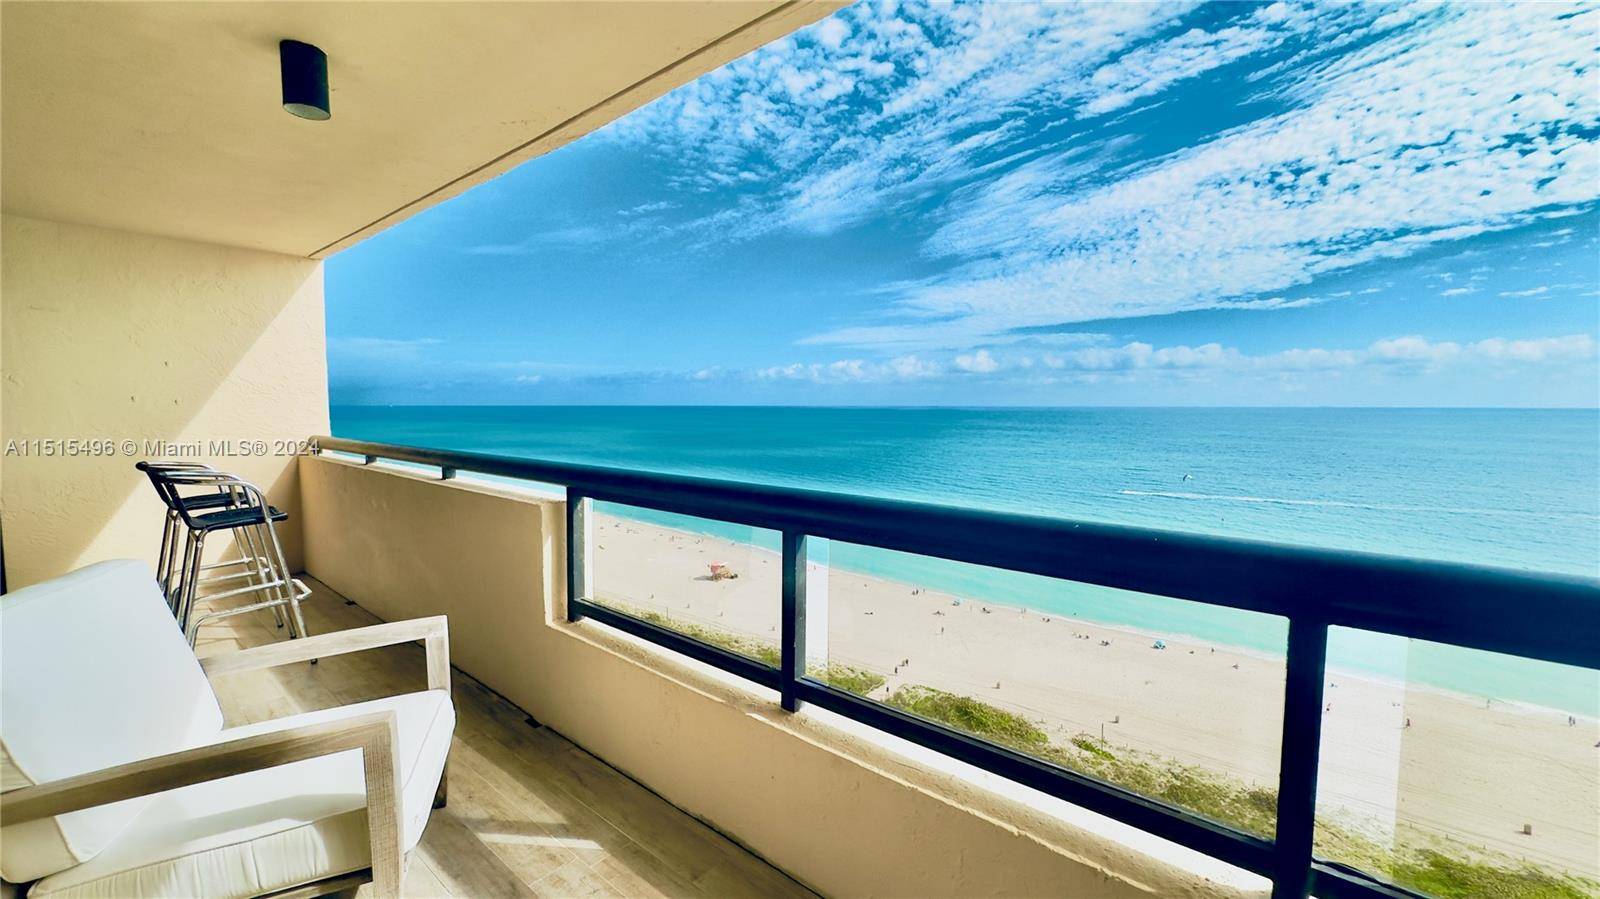 Stunning condo boasts direct ocean views and over 100K in upgrades.